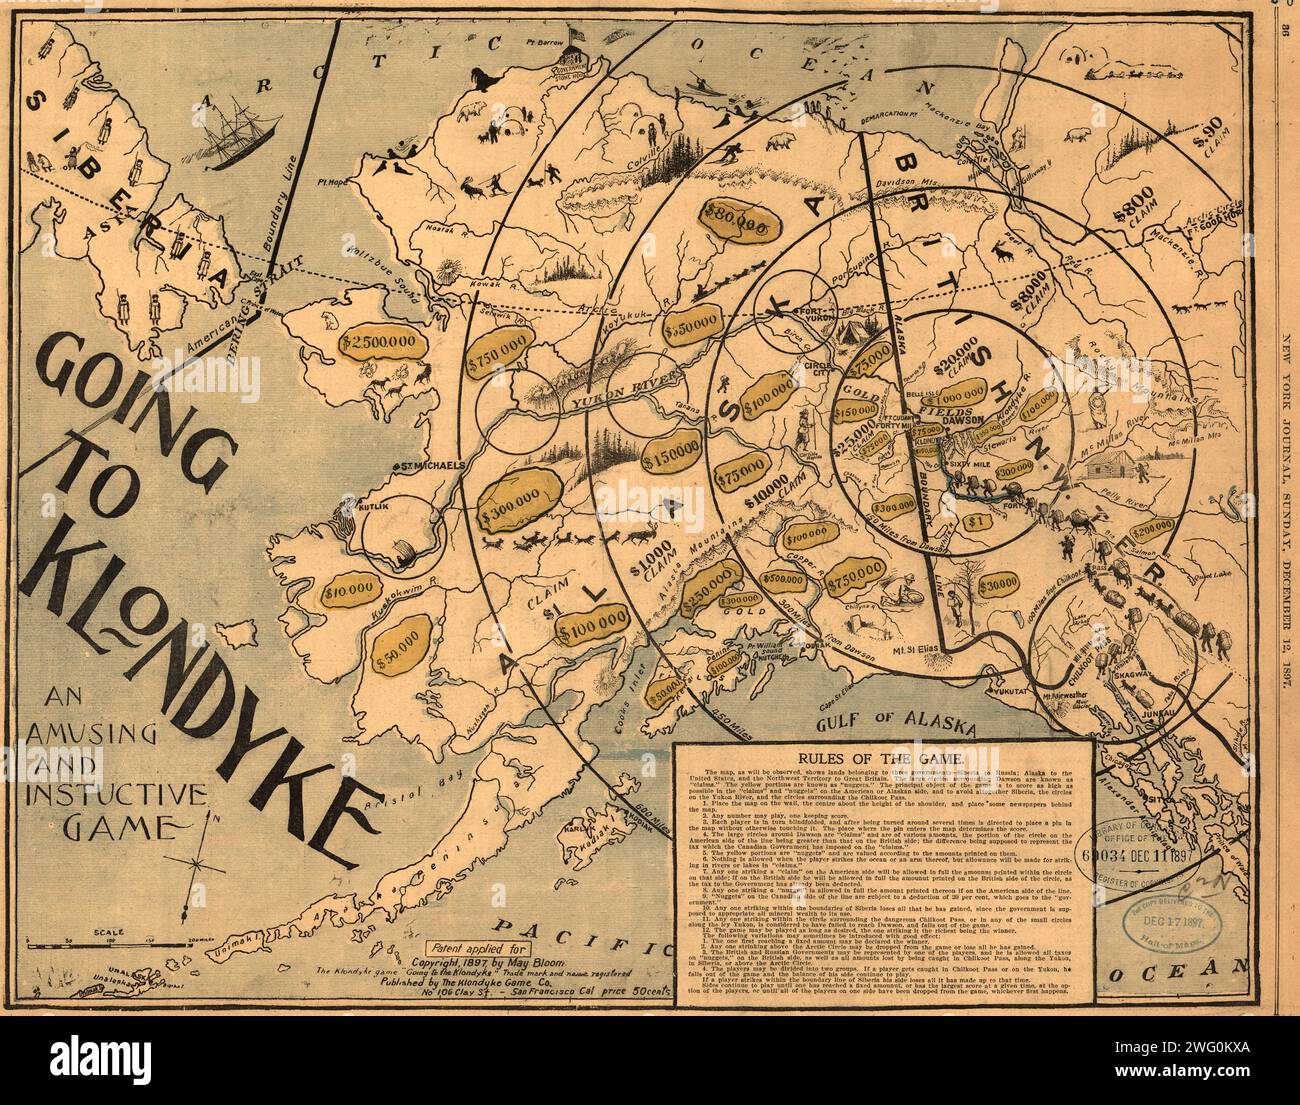 Going to Klondyke, 1897. The Klondike Gold Rush of 1898 was one of the largest gold frenzies in history. Tens of thousands of prospectors from around the world streamed north to Alaska and the Yukon in a feverish search for fortune. This game, Going to Klondyke,&quot; was created in 1897 on the basis of news reports about the large initial gold strikes in the Yukon and in anticipation of the coming rush. The game was highlighted in the New York Journal on December 12, 1897. It was produced by the Klondyke Game Company of San Francisco, possibly for sale to the many prospectors who would pass t Stock Photo